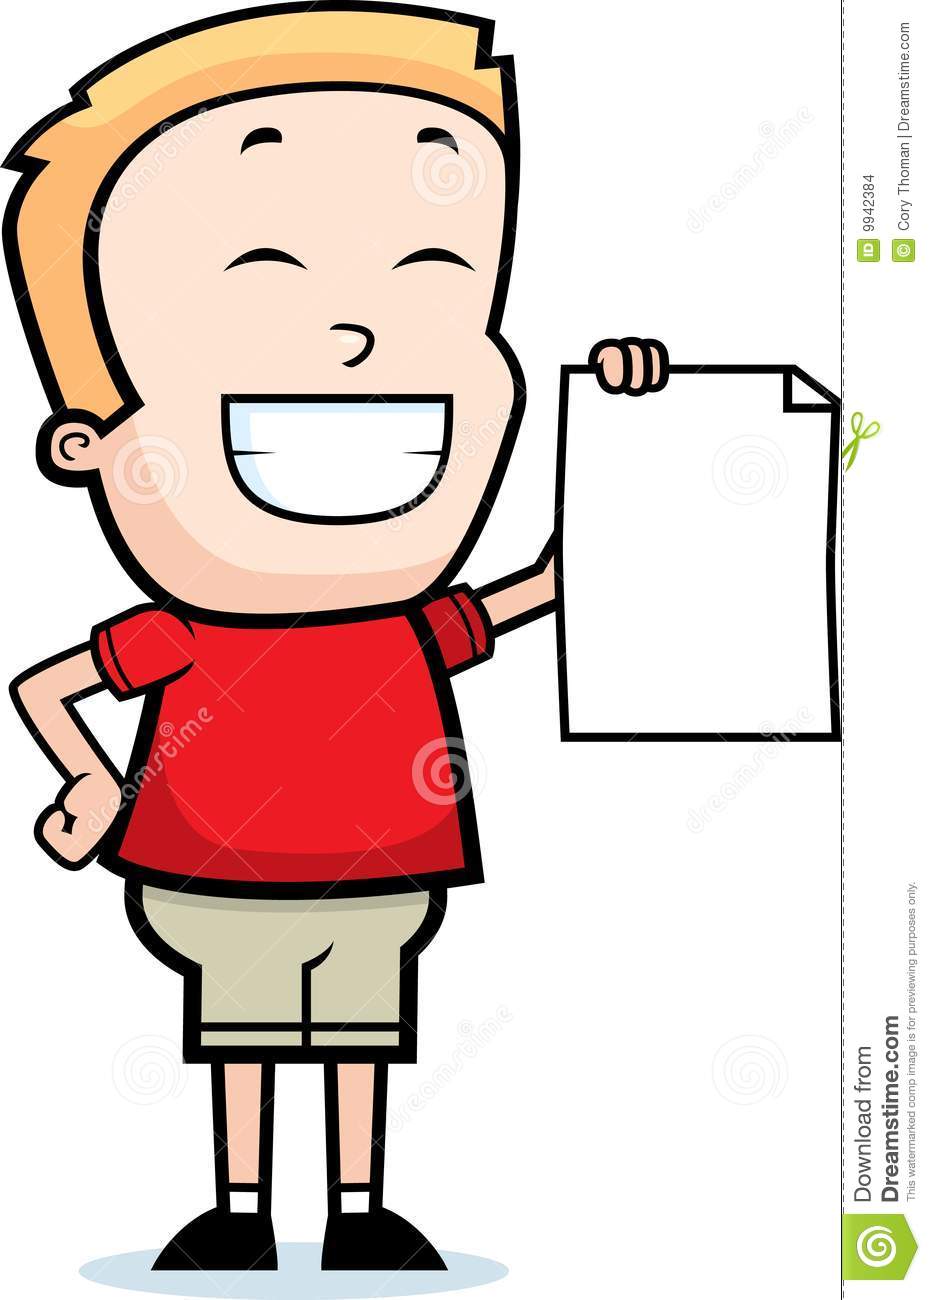 Cartoon Boy Smiling And Holding A Piece Of Paper